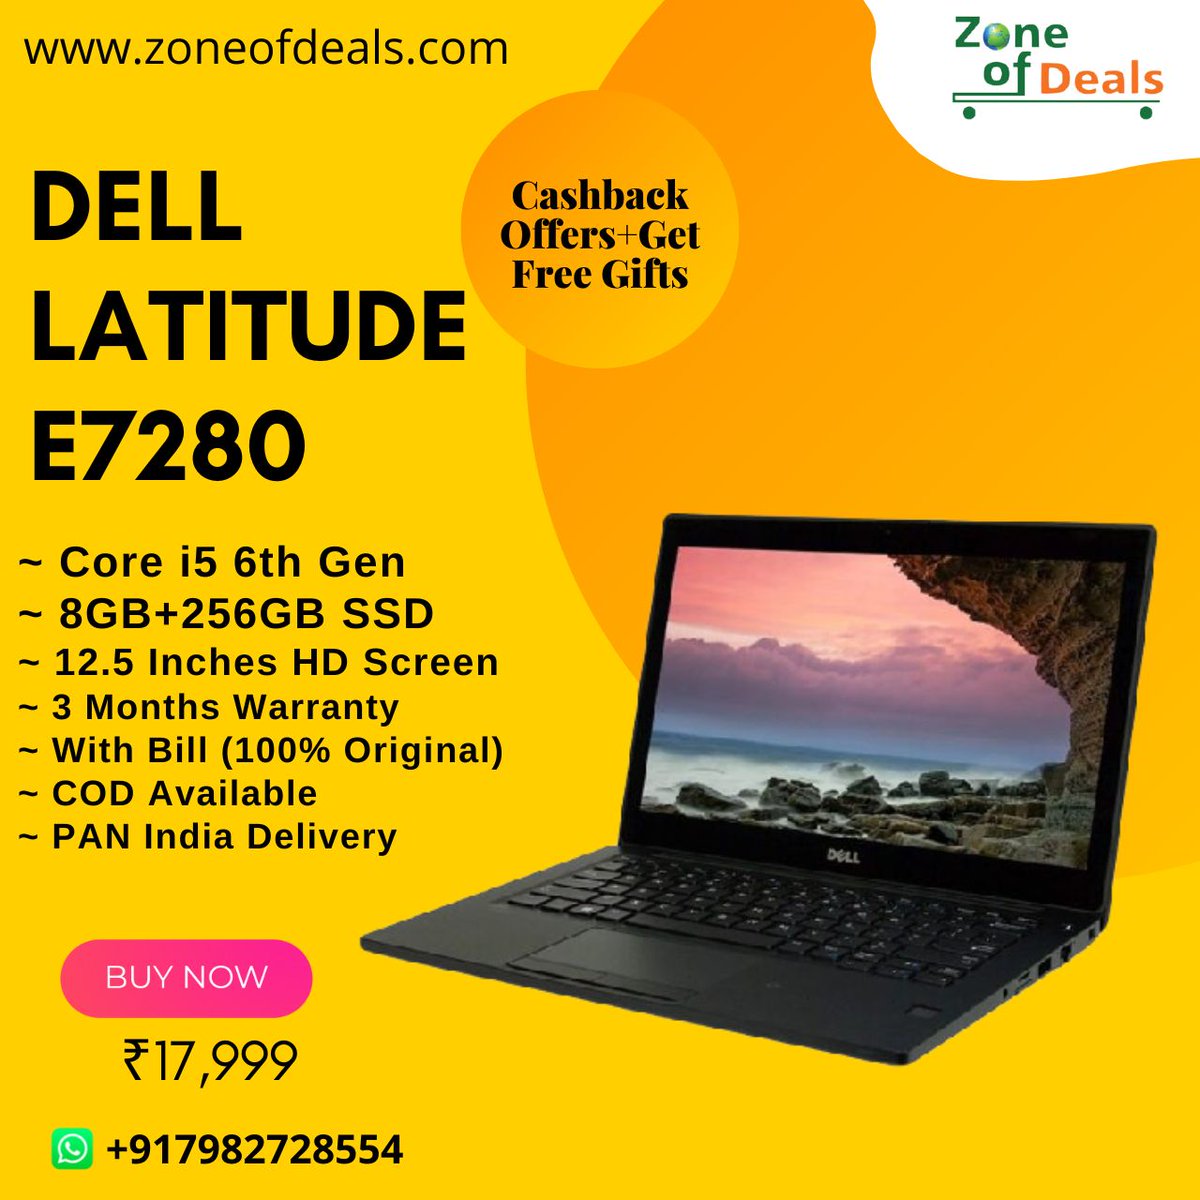 Dell Latitude E7280 | Core i5 6th Gen | 8GB RAM + 256GB SSD +  12.5 Inch Screen - Refurbished Laptop (Excellent Condition).
COD Also Available
Safe Shipping Through Reputed Courier Services.
#delllaptop #laptopsunder20000 #refurbishedlaptops #laptopsforstudents #delllaptops #core